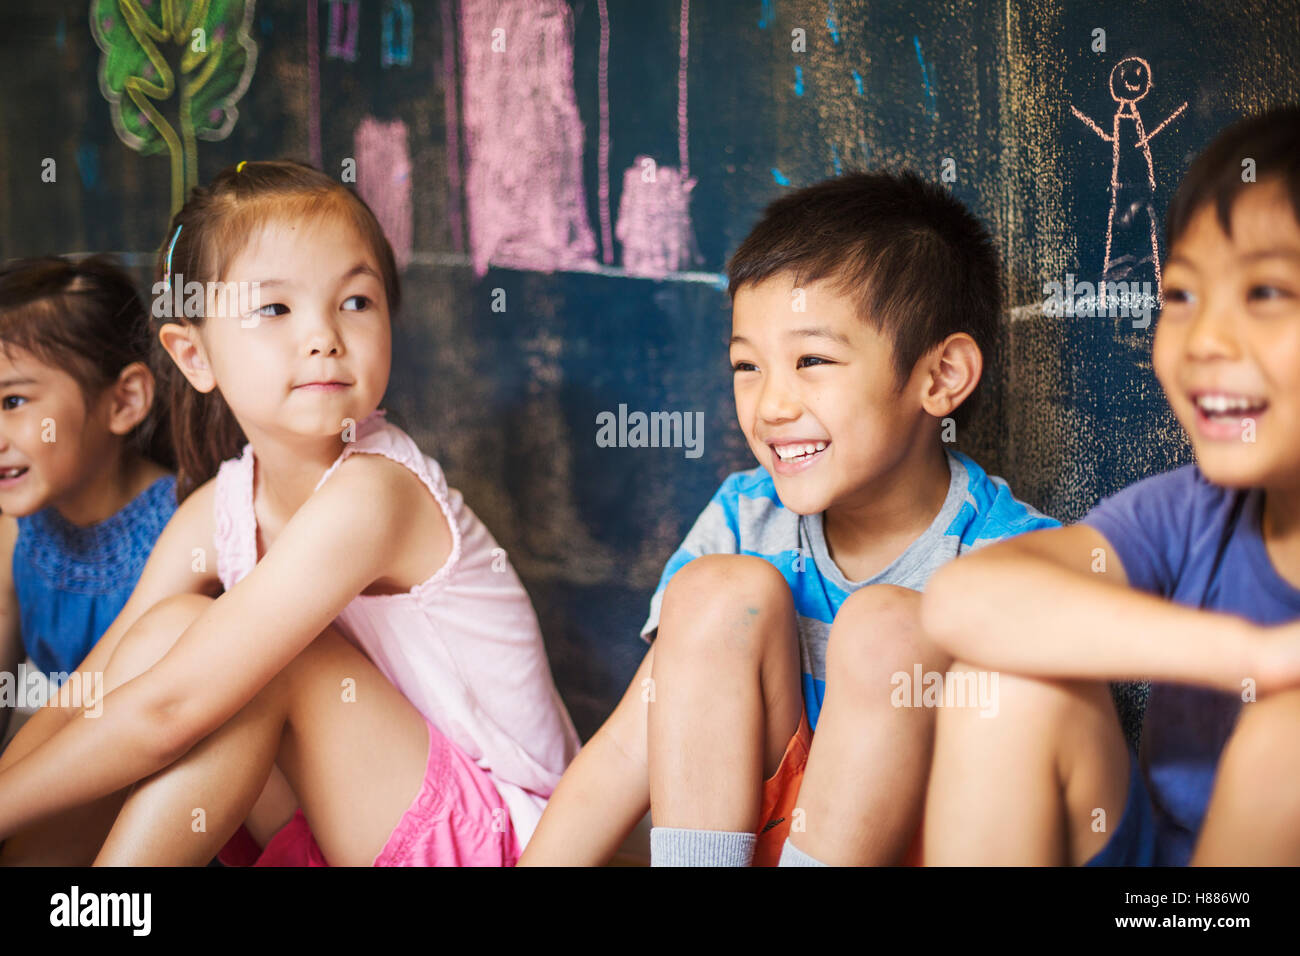 A group of children in school. Boys and girls sitting on the floor. Stock Photo